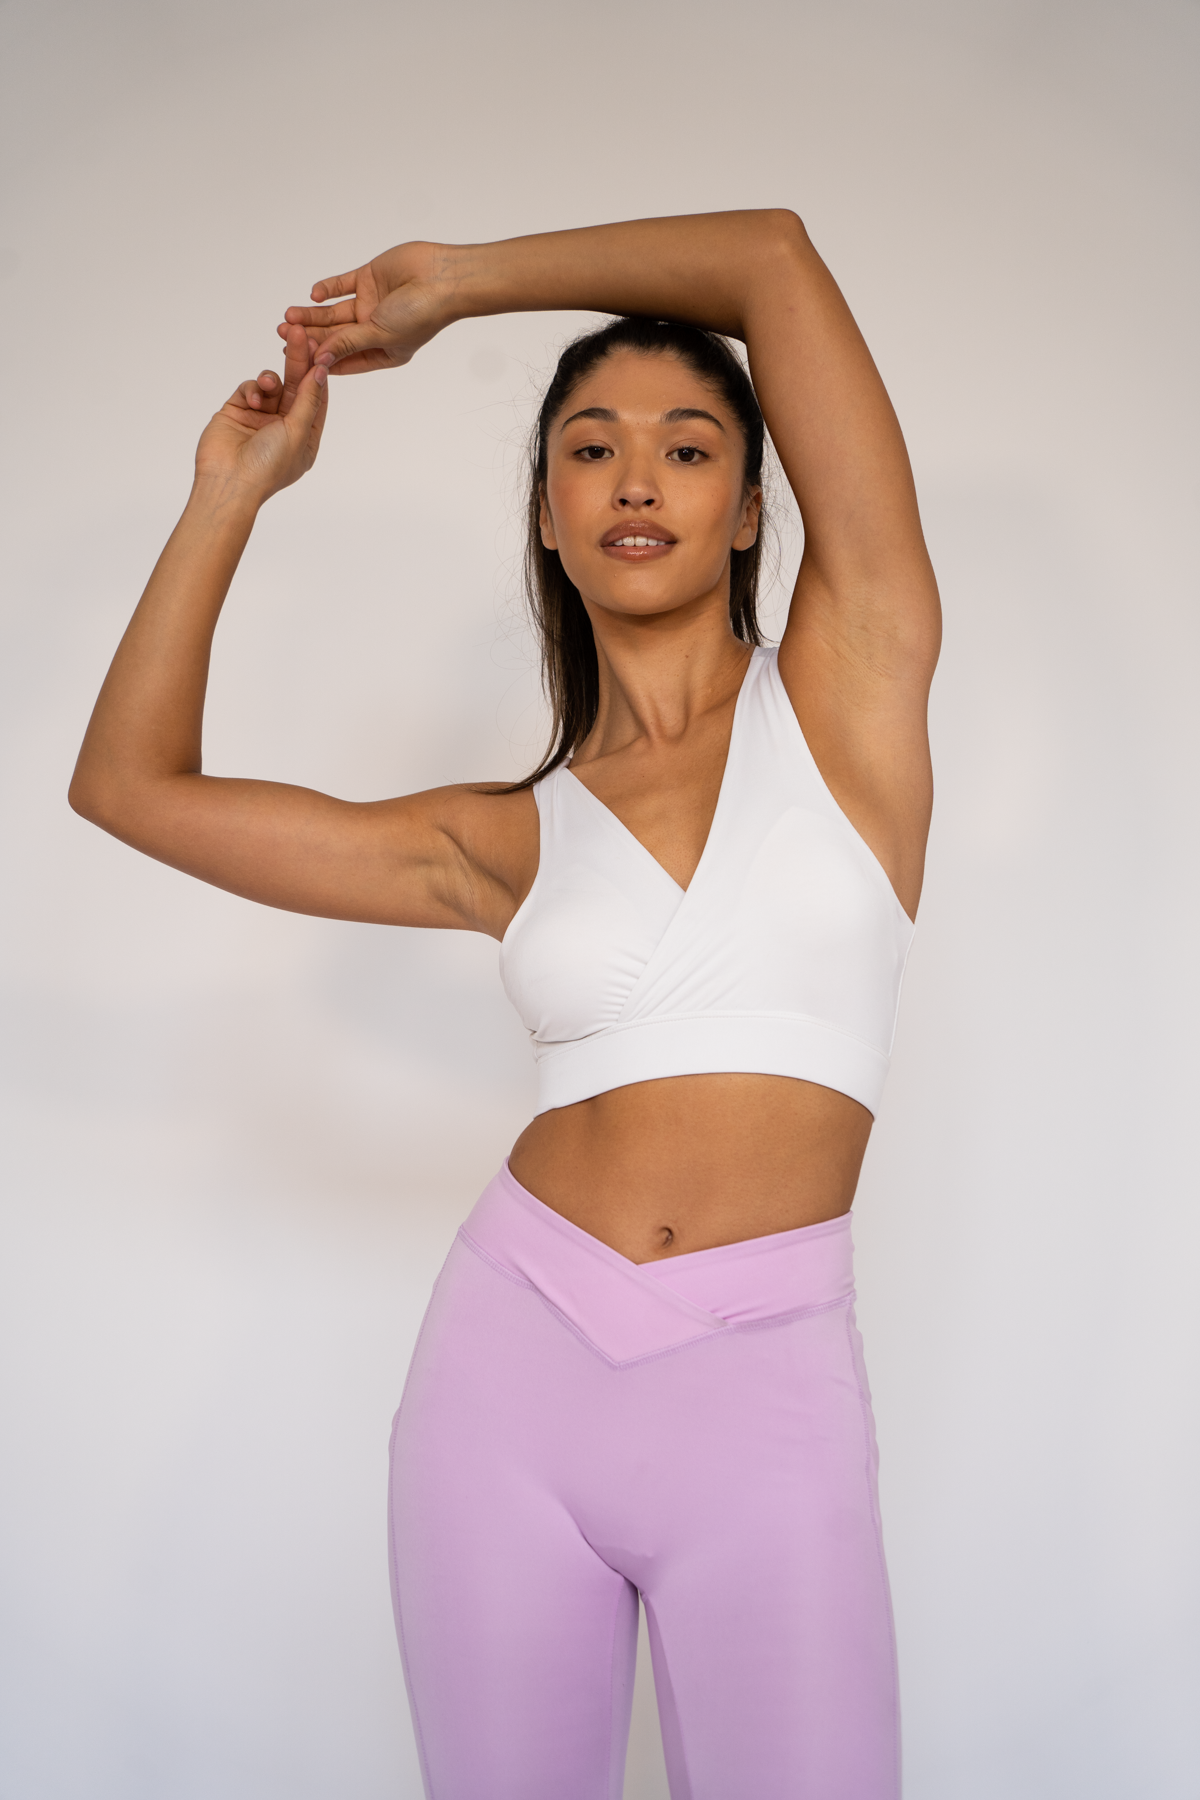 Lululemon Align Asymmetrical Bra Pink - $41 New With Tags - From A